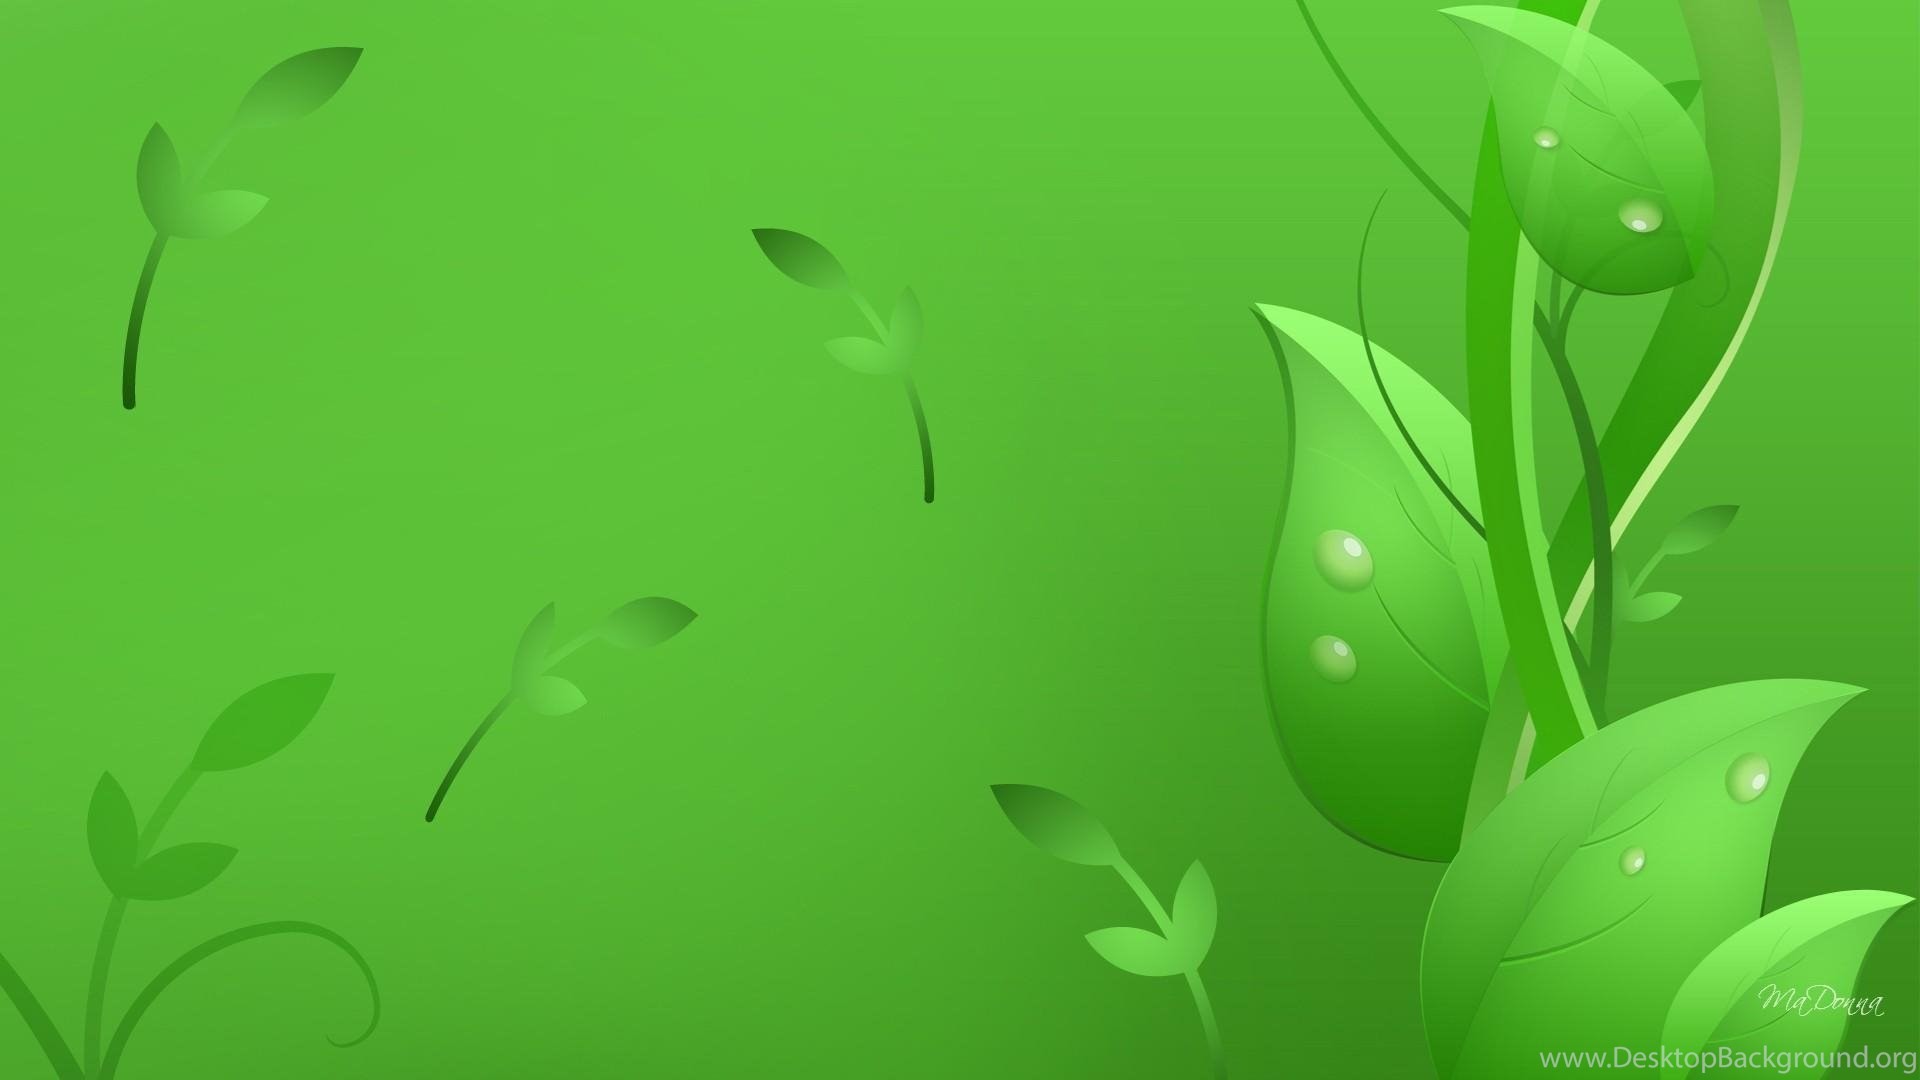 1920x1080 Fresh And Natural Green Leaf Wallpapers Image 1280x960 Hd Wallpapers .